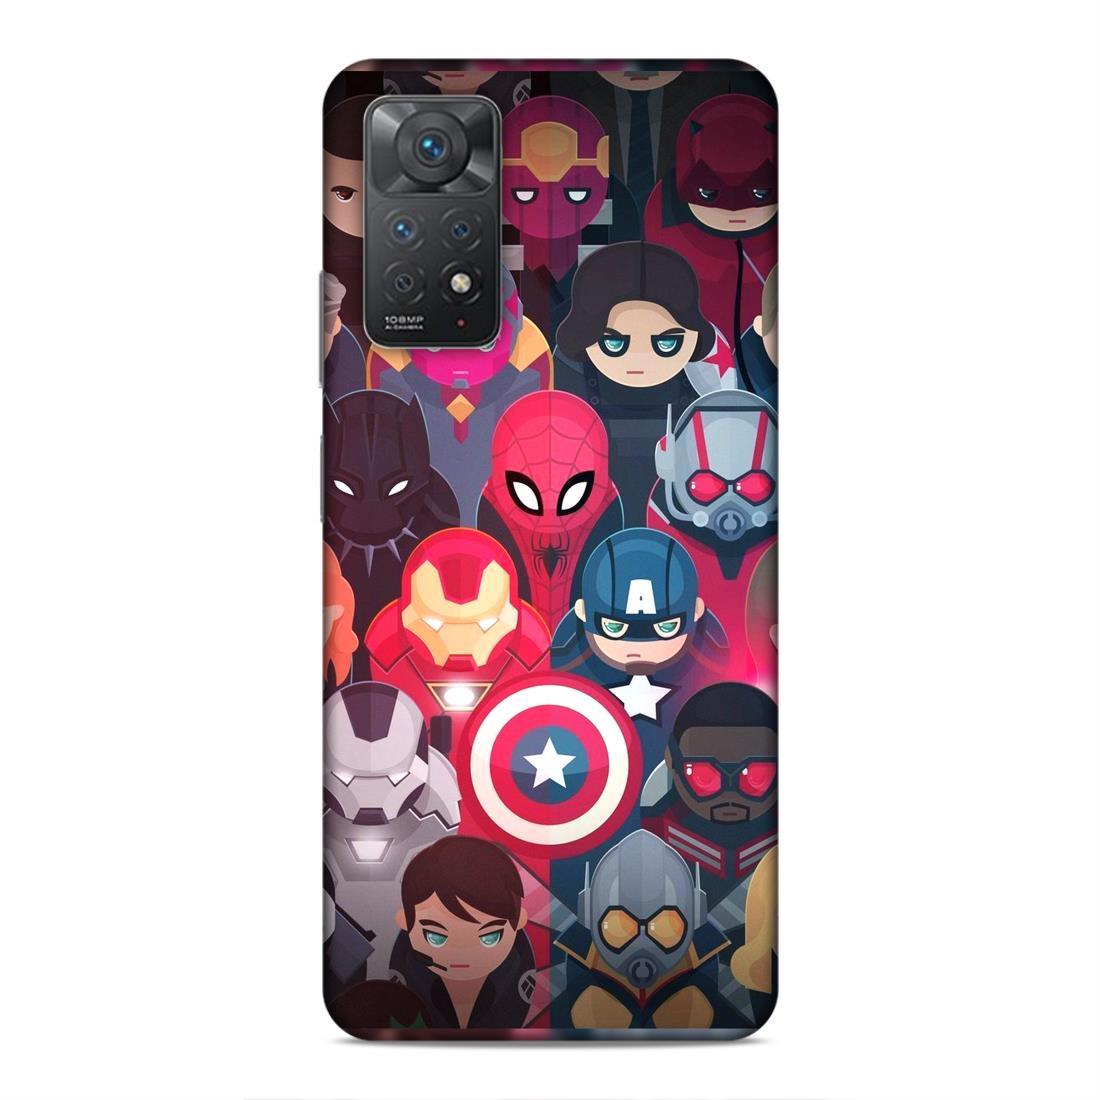 Avenger Heroes Hard Back Case For Xiaomi Redmi Note 11 Pro 4G / 5G / Note 11 Pro Plus 5G